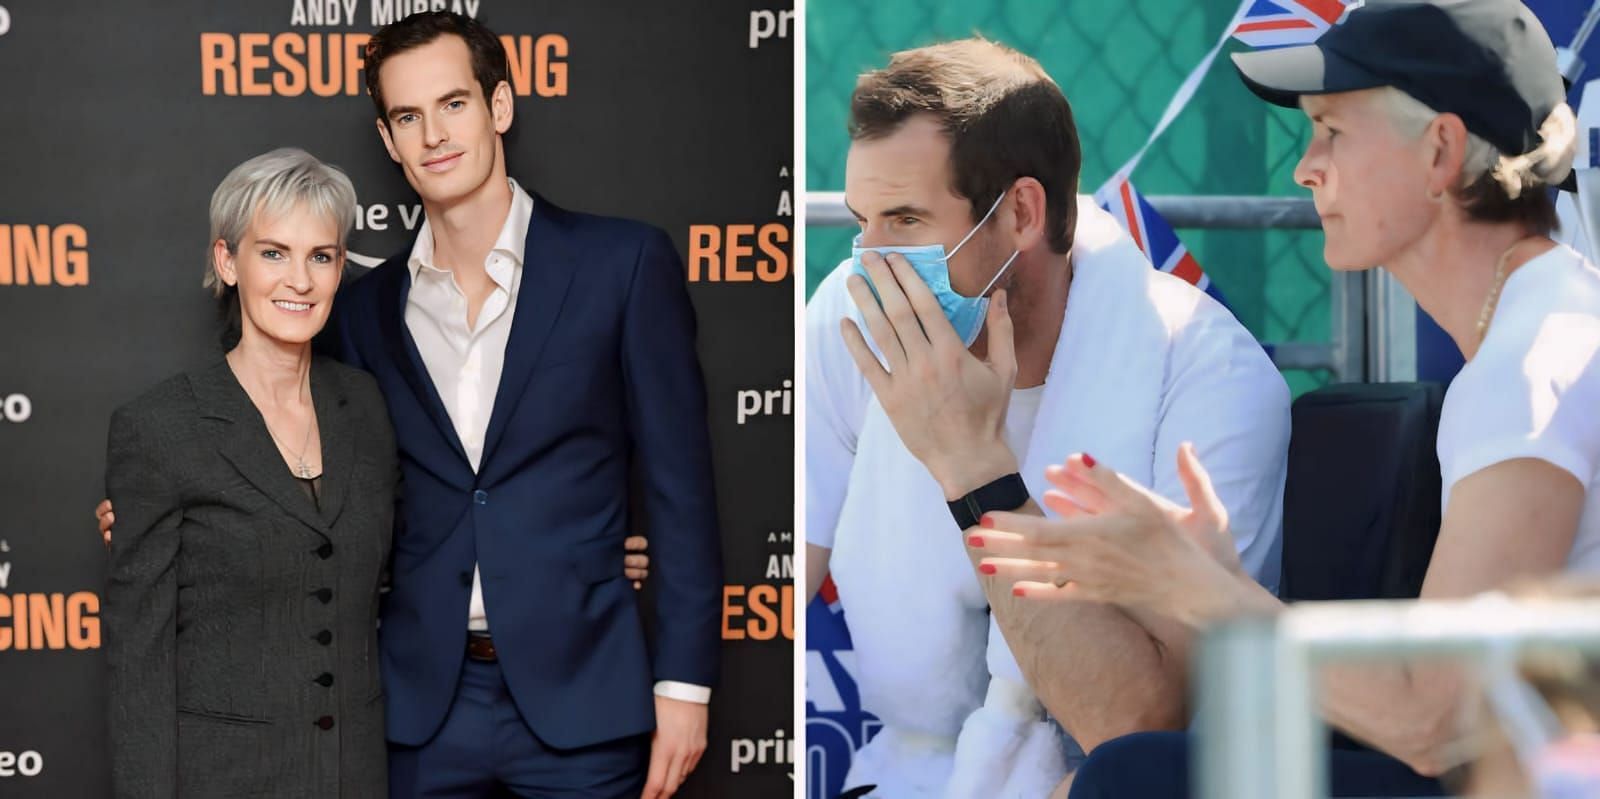 Andy Murray and Judy Murray banter with each other